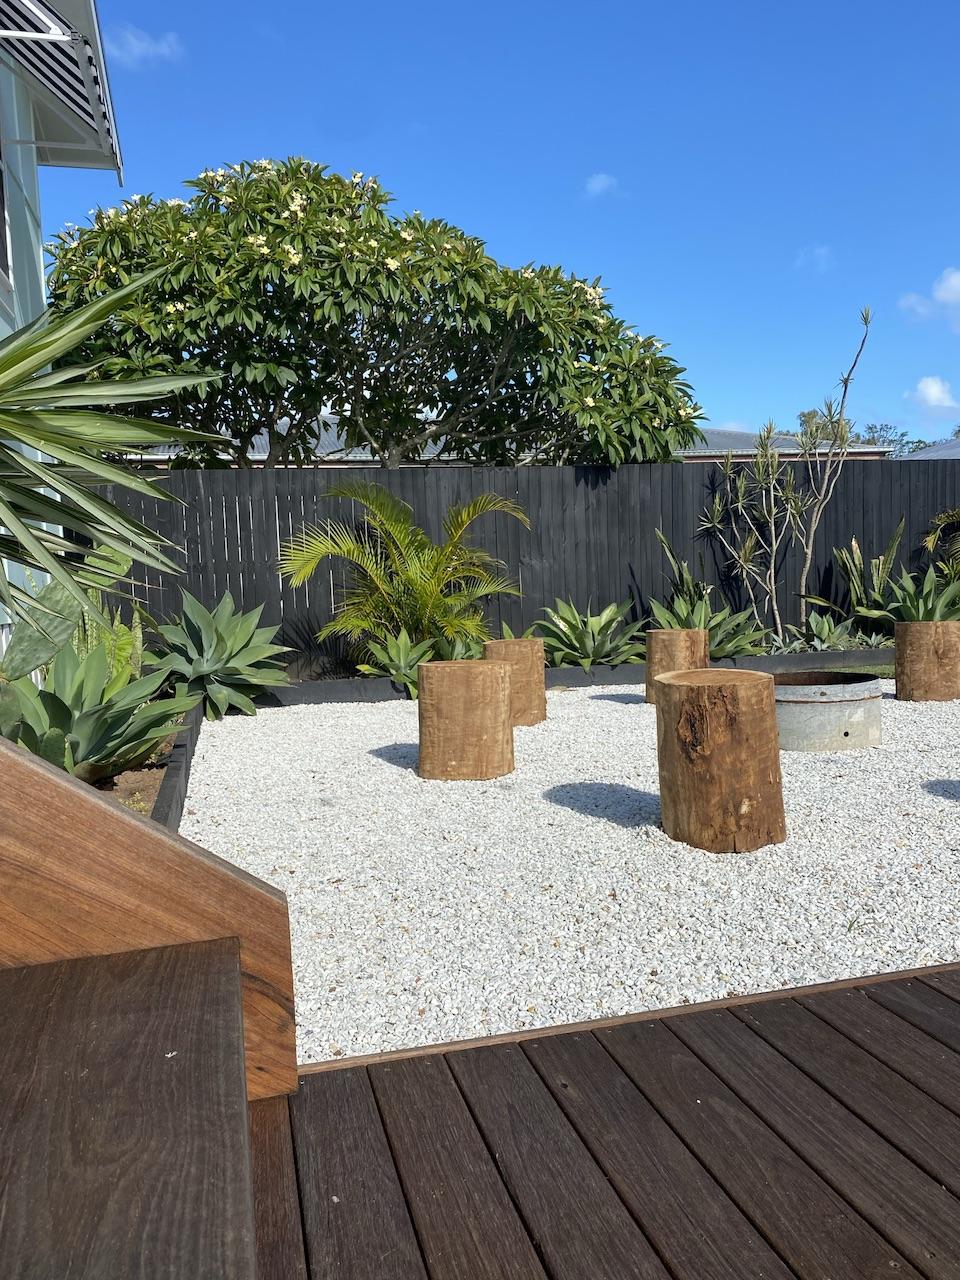 Fire Pit, gravel and stumps, outdoor space for film, decking ideas